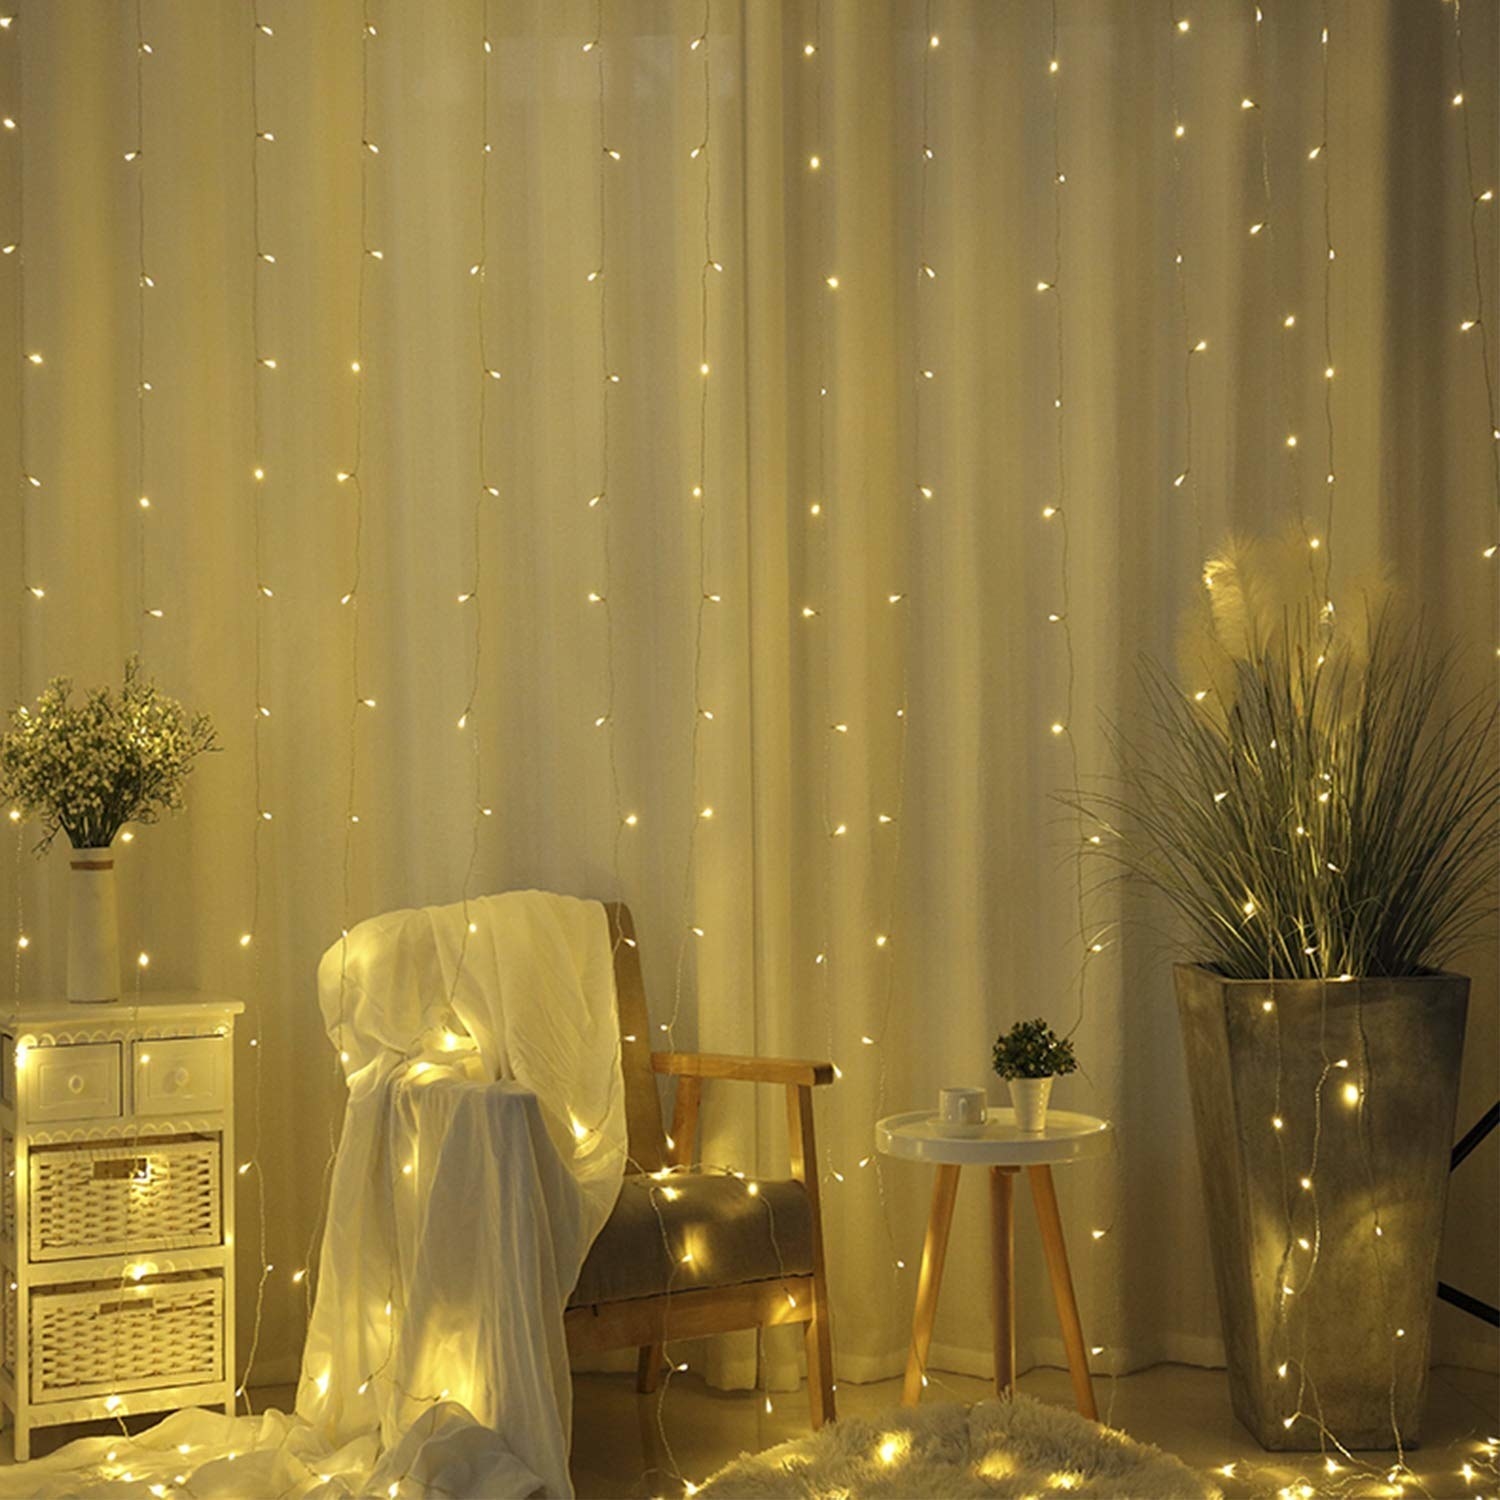 The light curtain layered with translucent white curtains. There&#x27;s a chair, plant, side table, and a cabinet in front of the curtains.